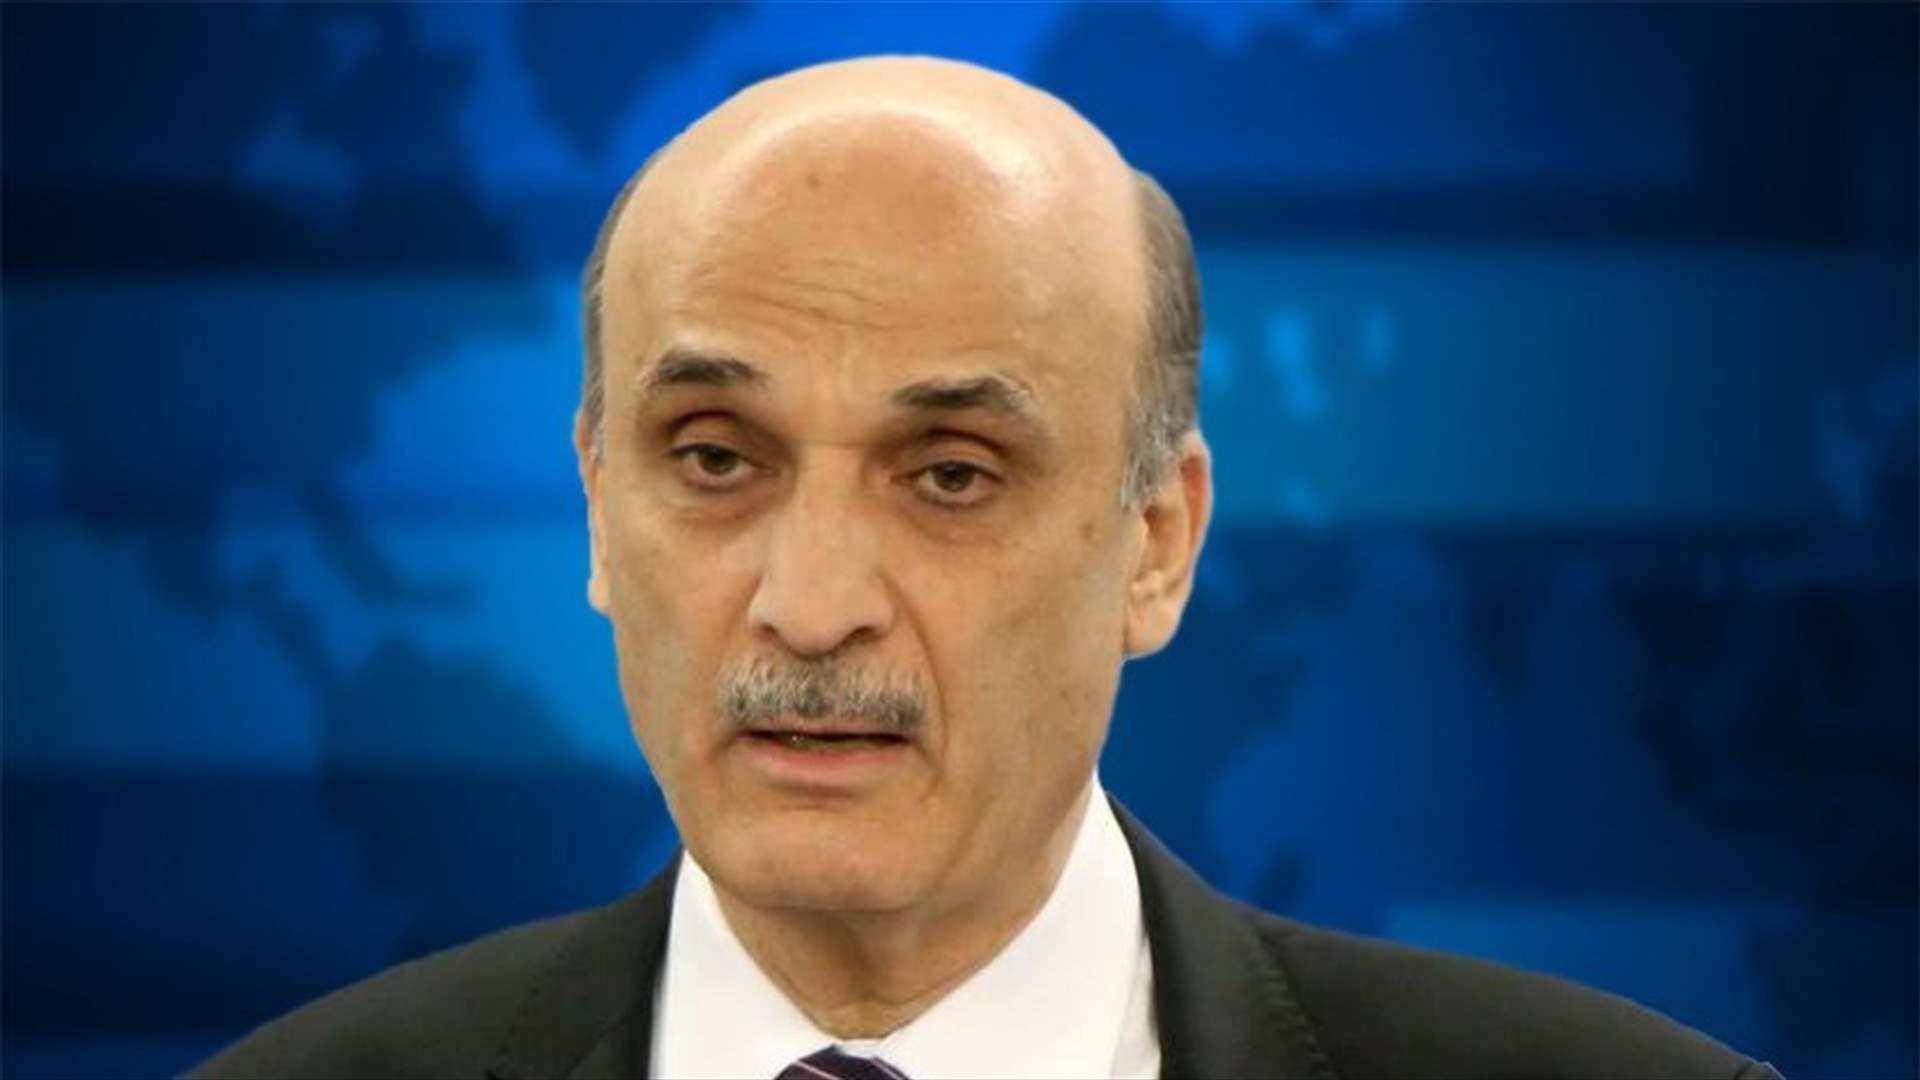 Geagea: Pressure ongoing to secure election of Aoun as president